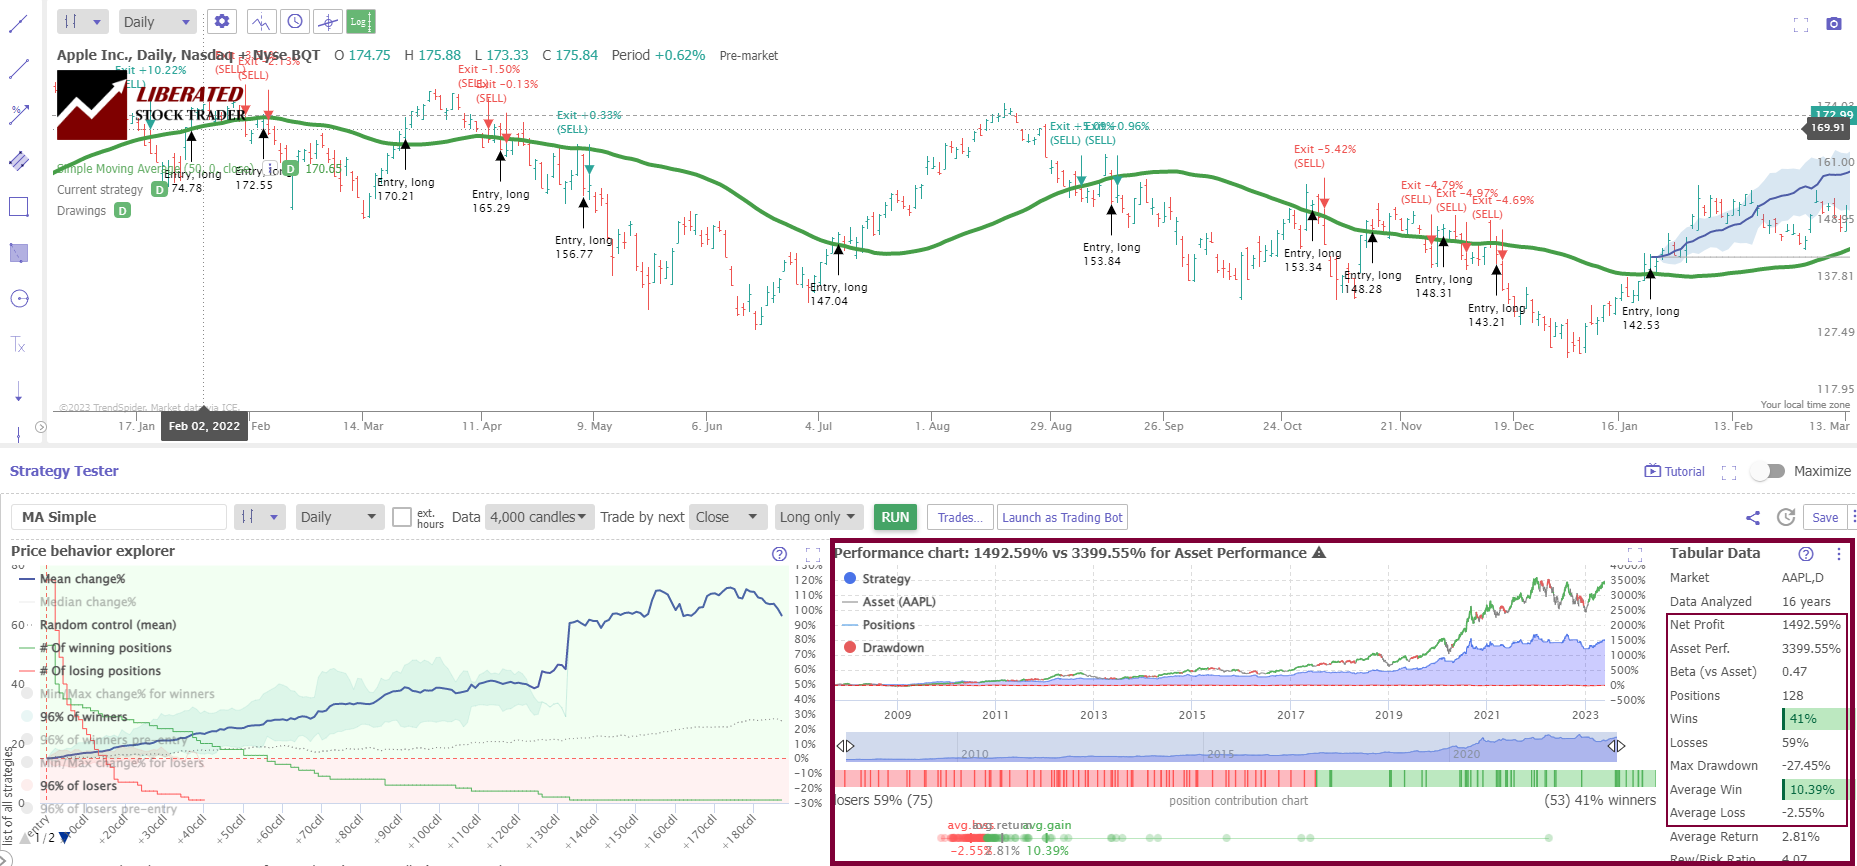 Simple Moving Average Backtesting Performance Results (Ticker: AAPL)